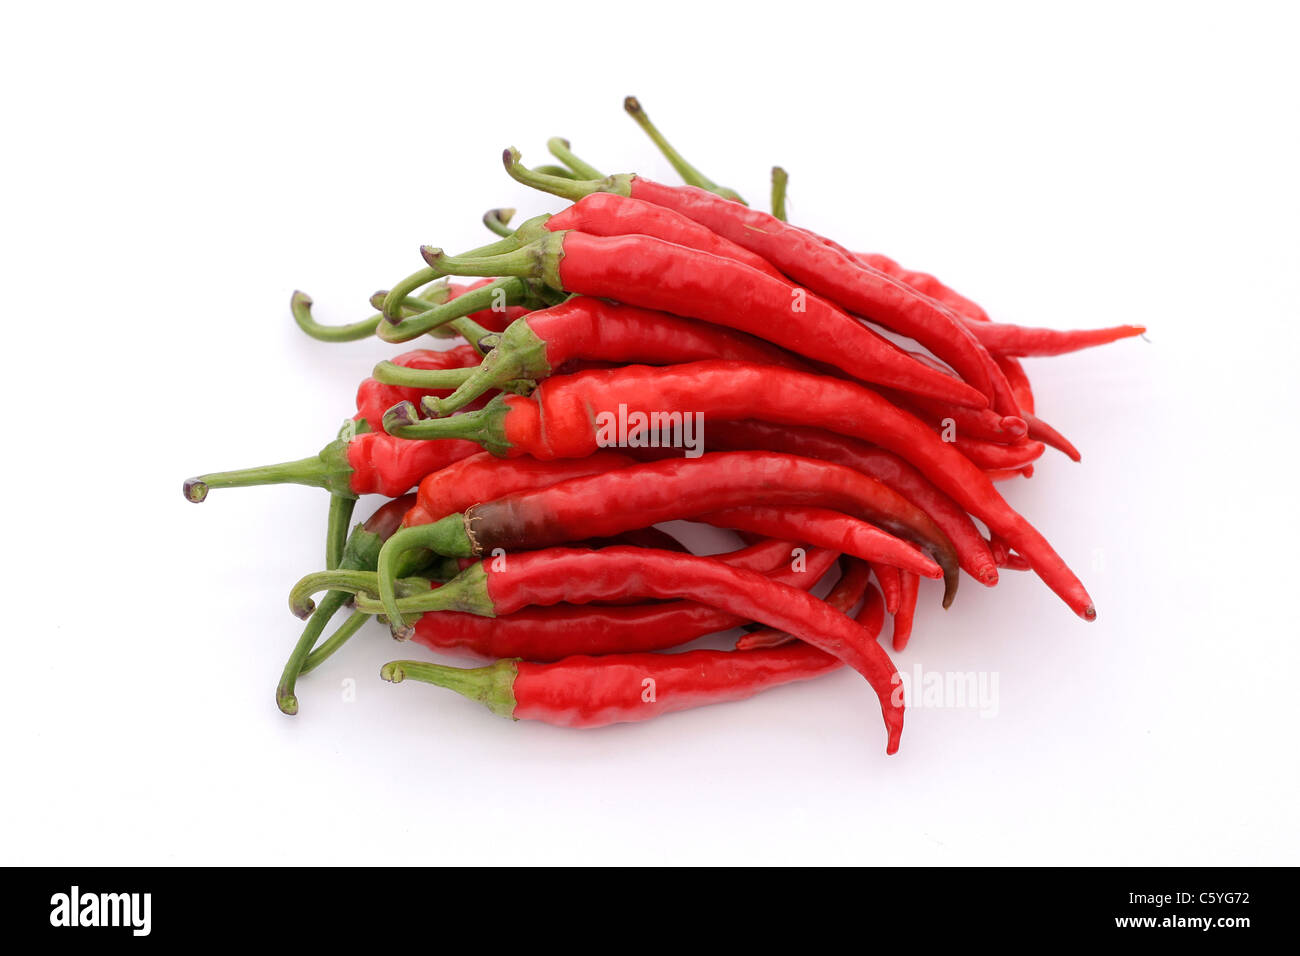 Pimento, cayenne red pepper along (Capsicum annuum). Stock Photo